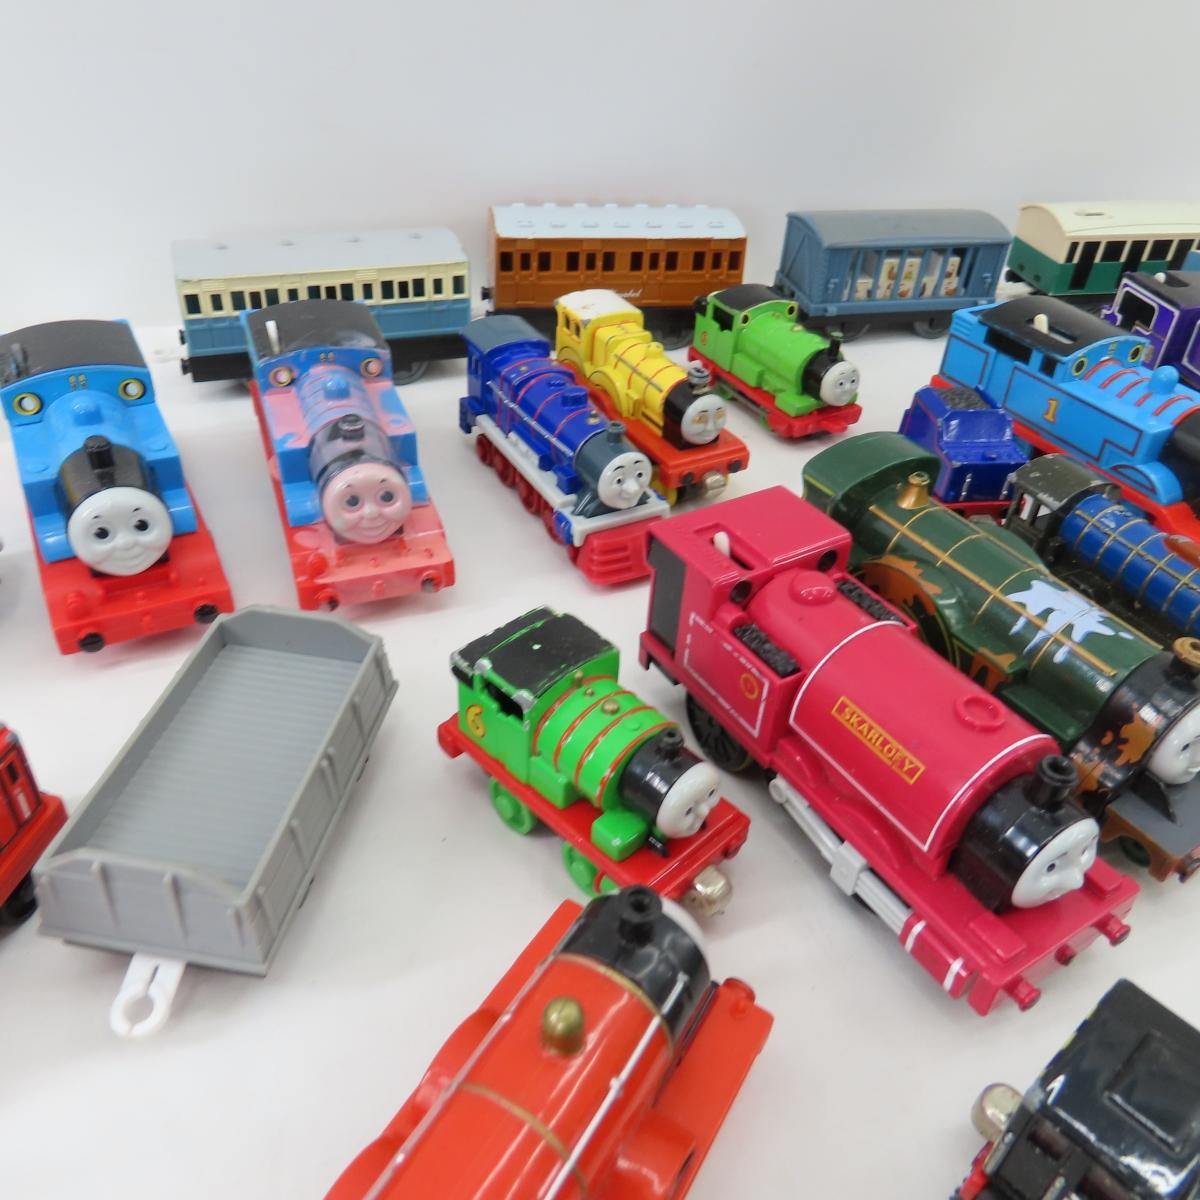 Thomas the Tank Engine Toy Trains and more.